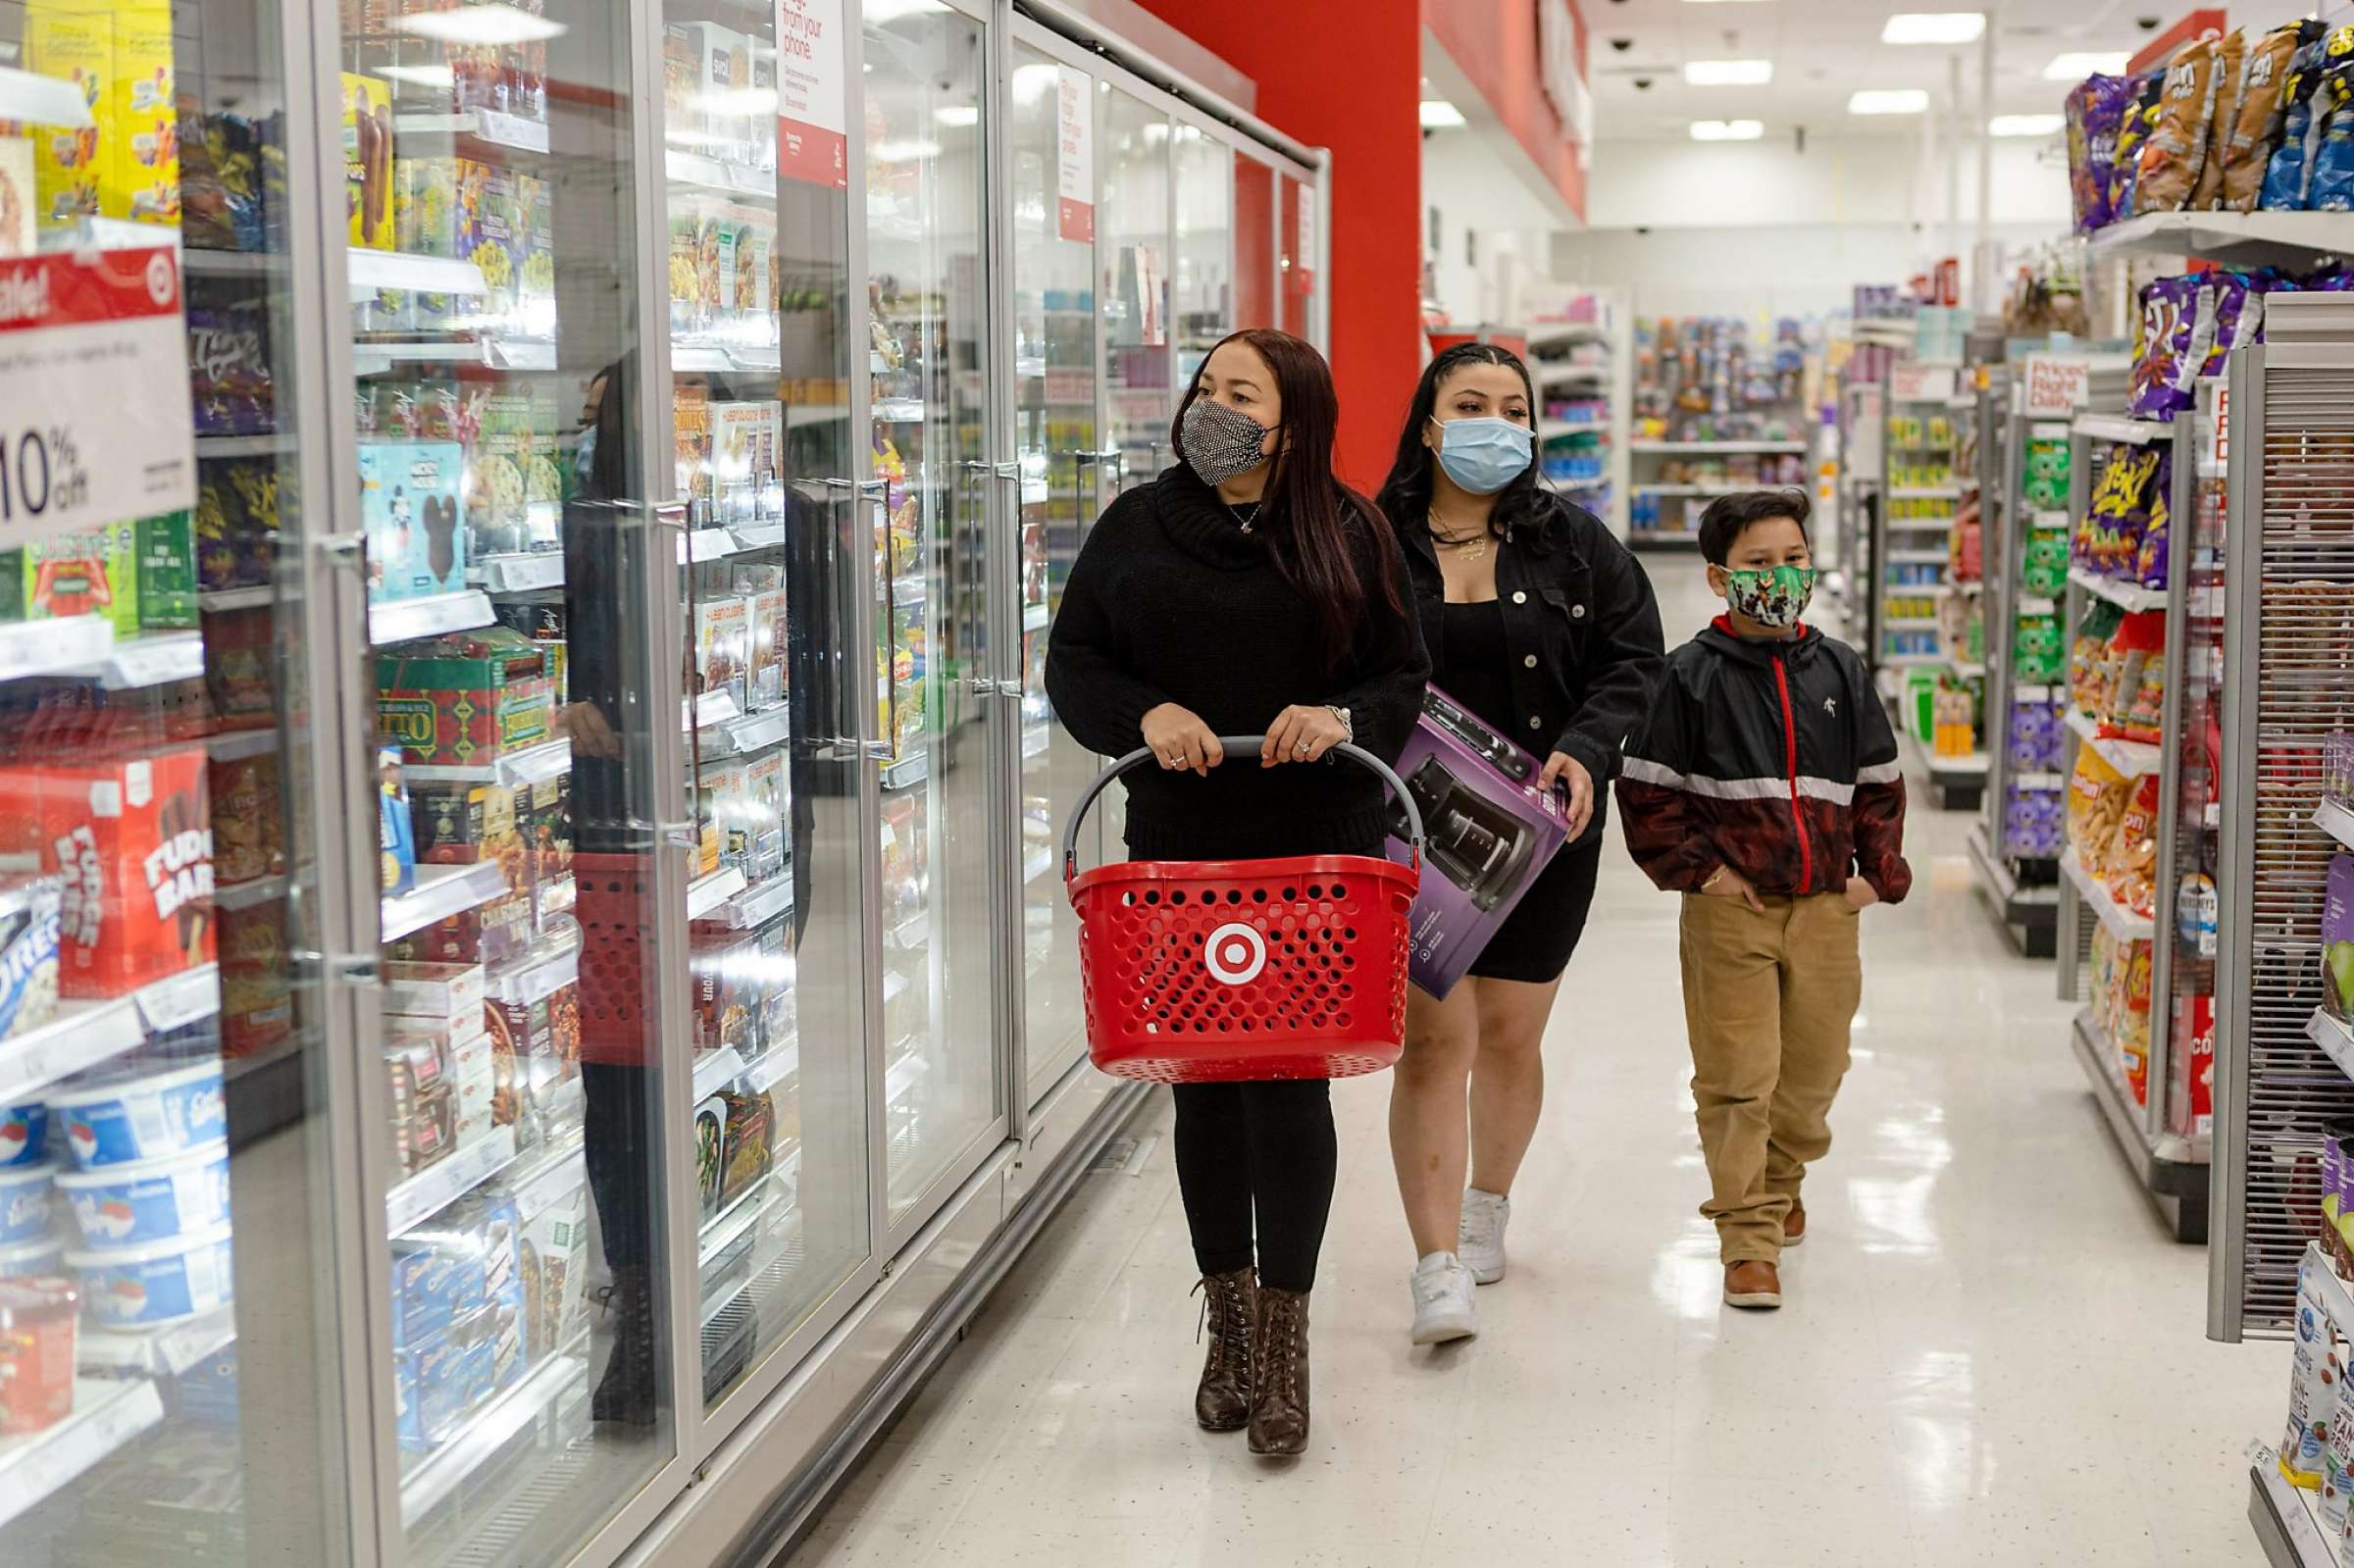 Victoria Vega (left) and her children, Alondra Vega (16), and Bryant Aleman (8), wear face masks as they shop at Target on Thursday, February 4, 2021, in San Francisco, Calif.